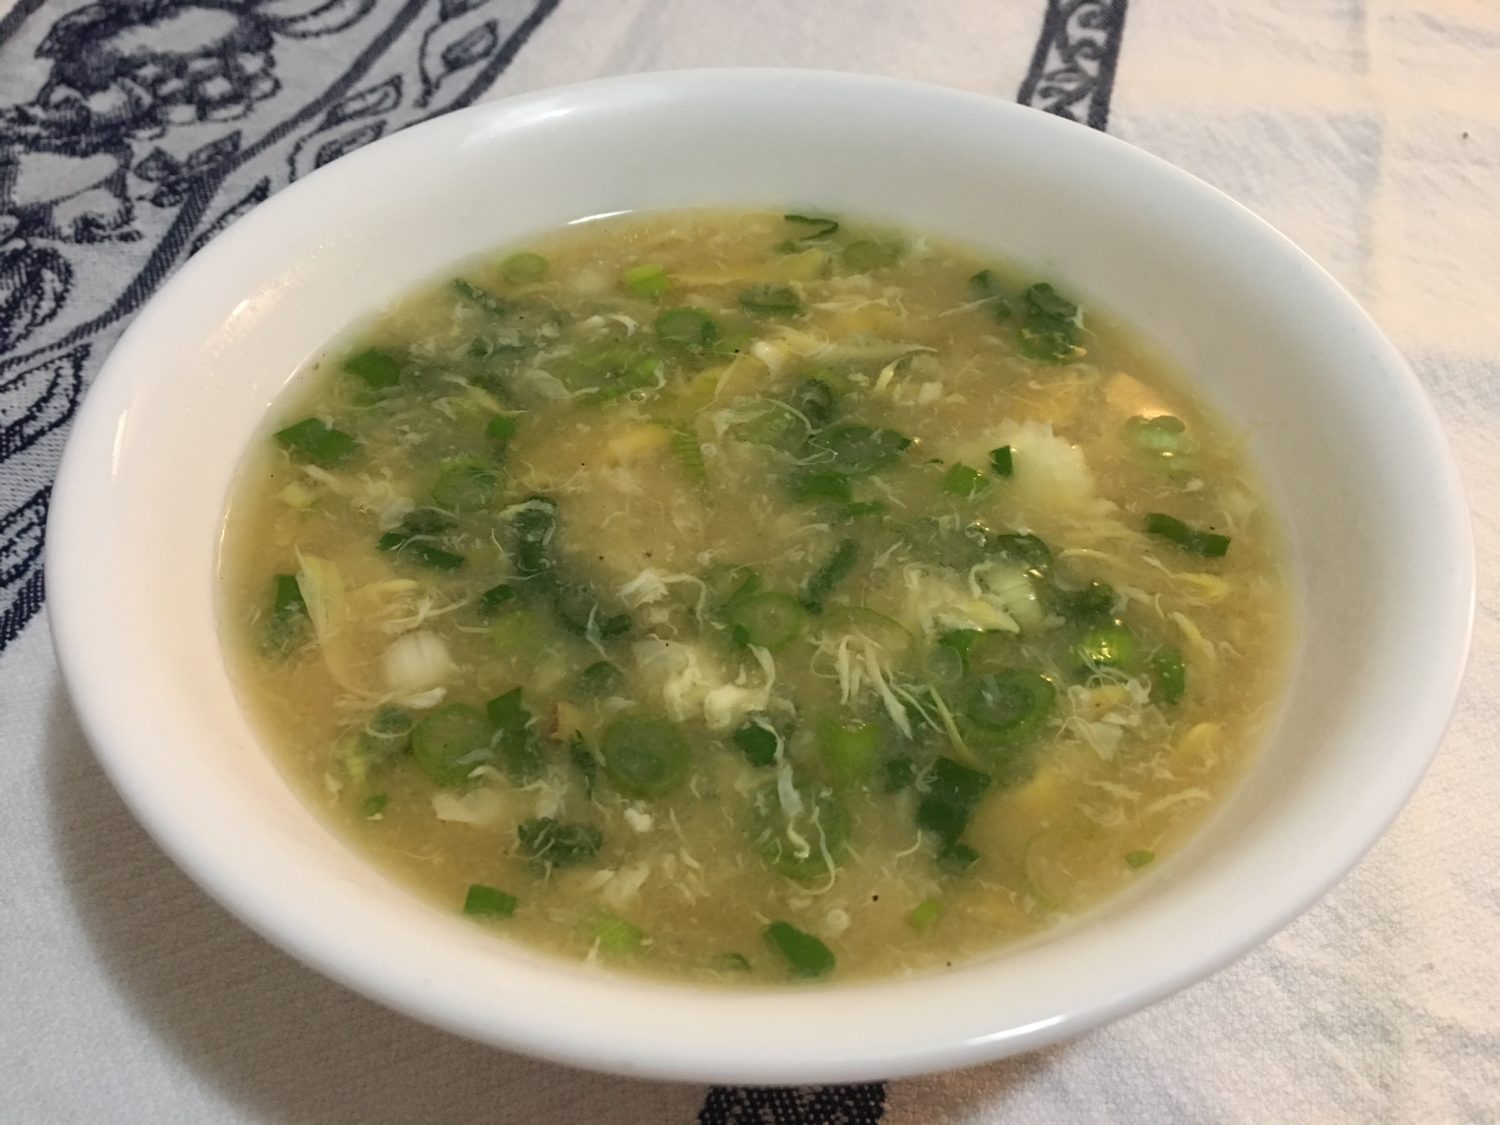 Green Onion Egg Drop Soup - Taste and Review